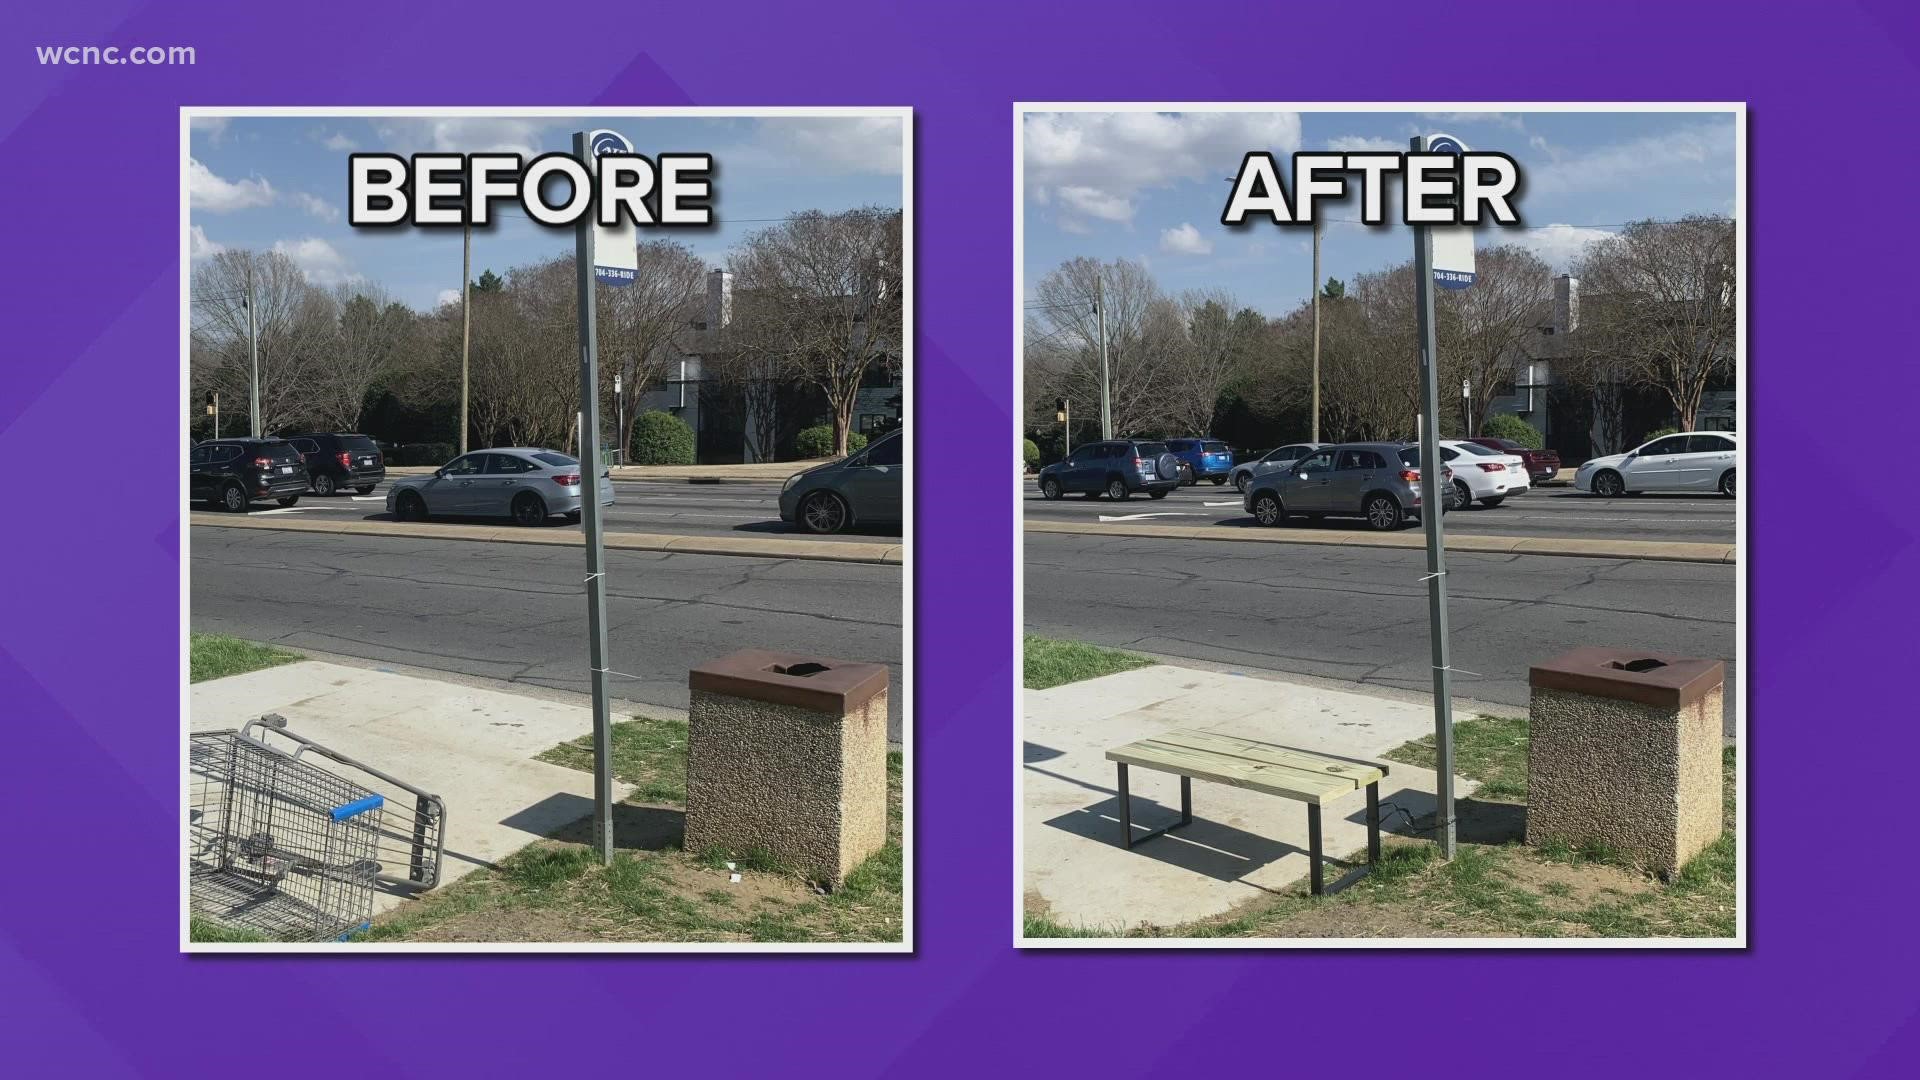 Charlotte Urbanists is adding benches at bus stops that don't currently have any seating.